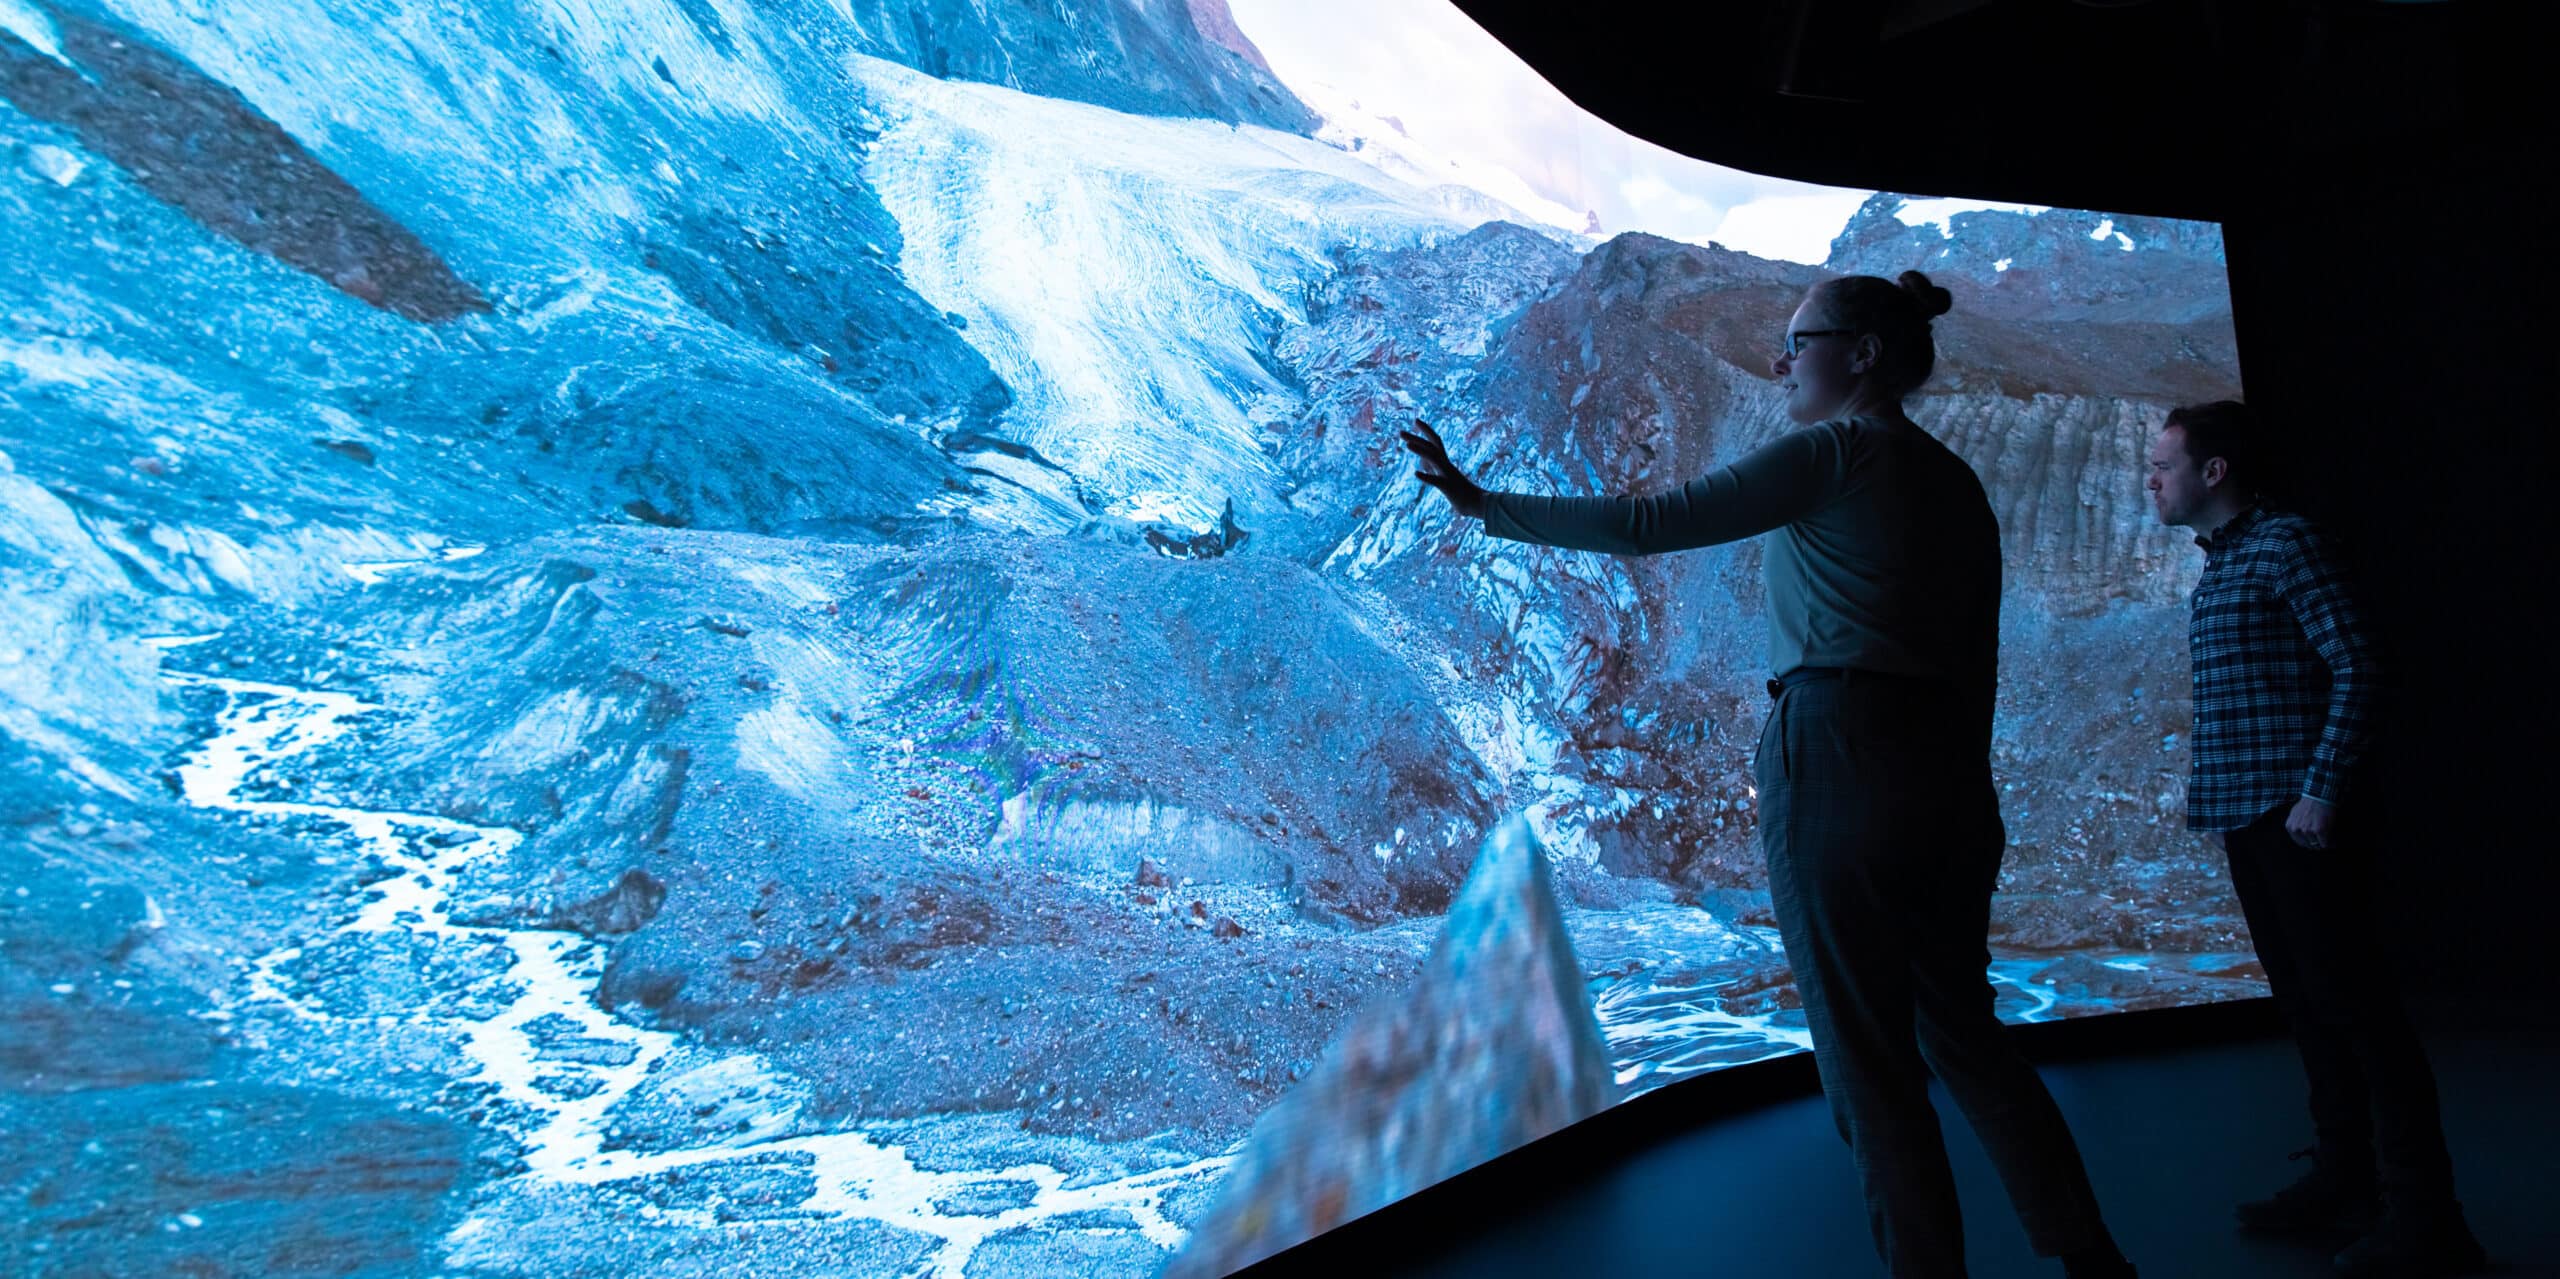 A woman reaches out to an enormous curved viewing screen in a dark room. The screen shows a mountain valley with a glacier.